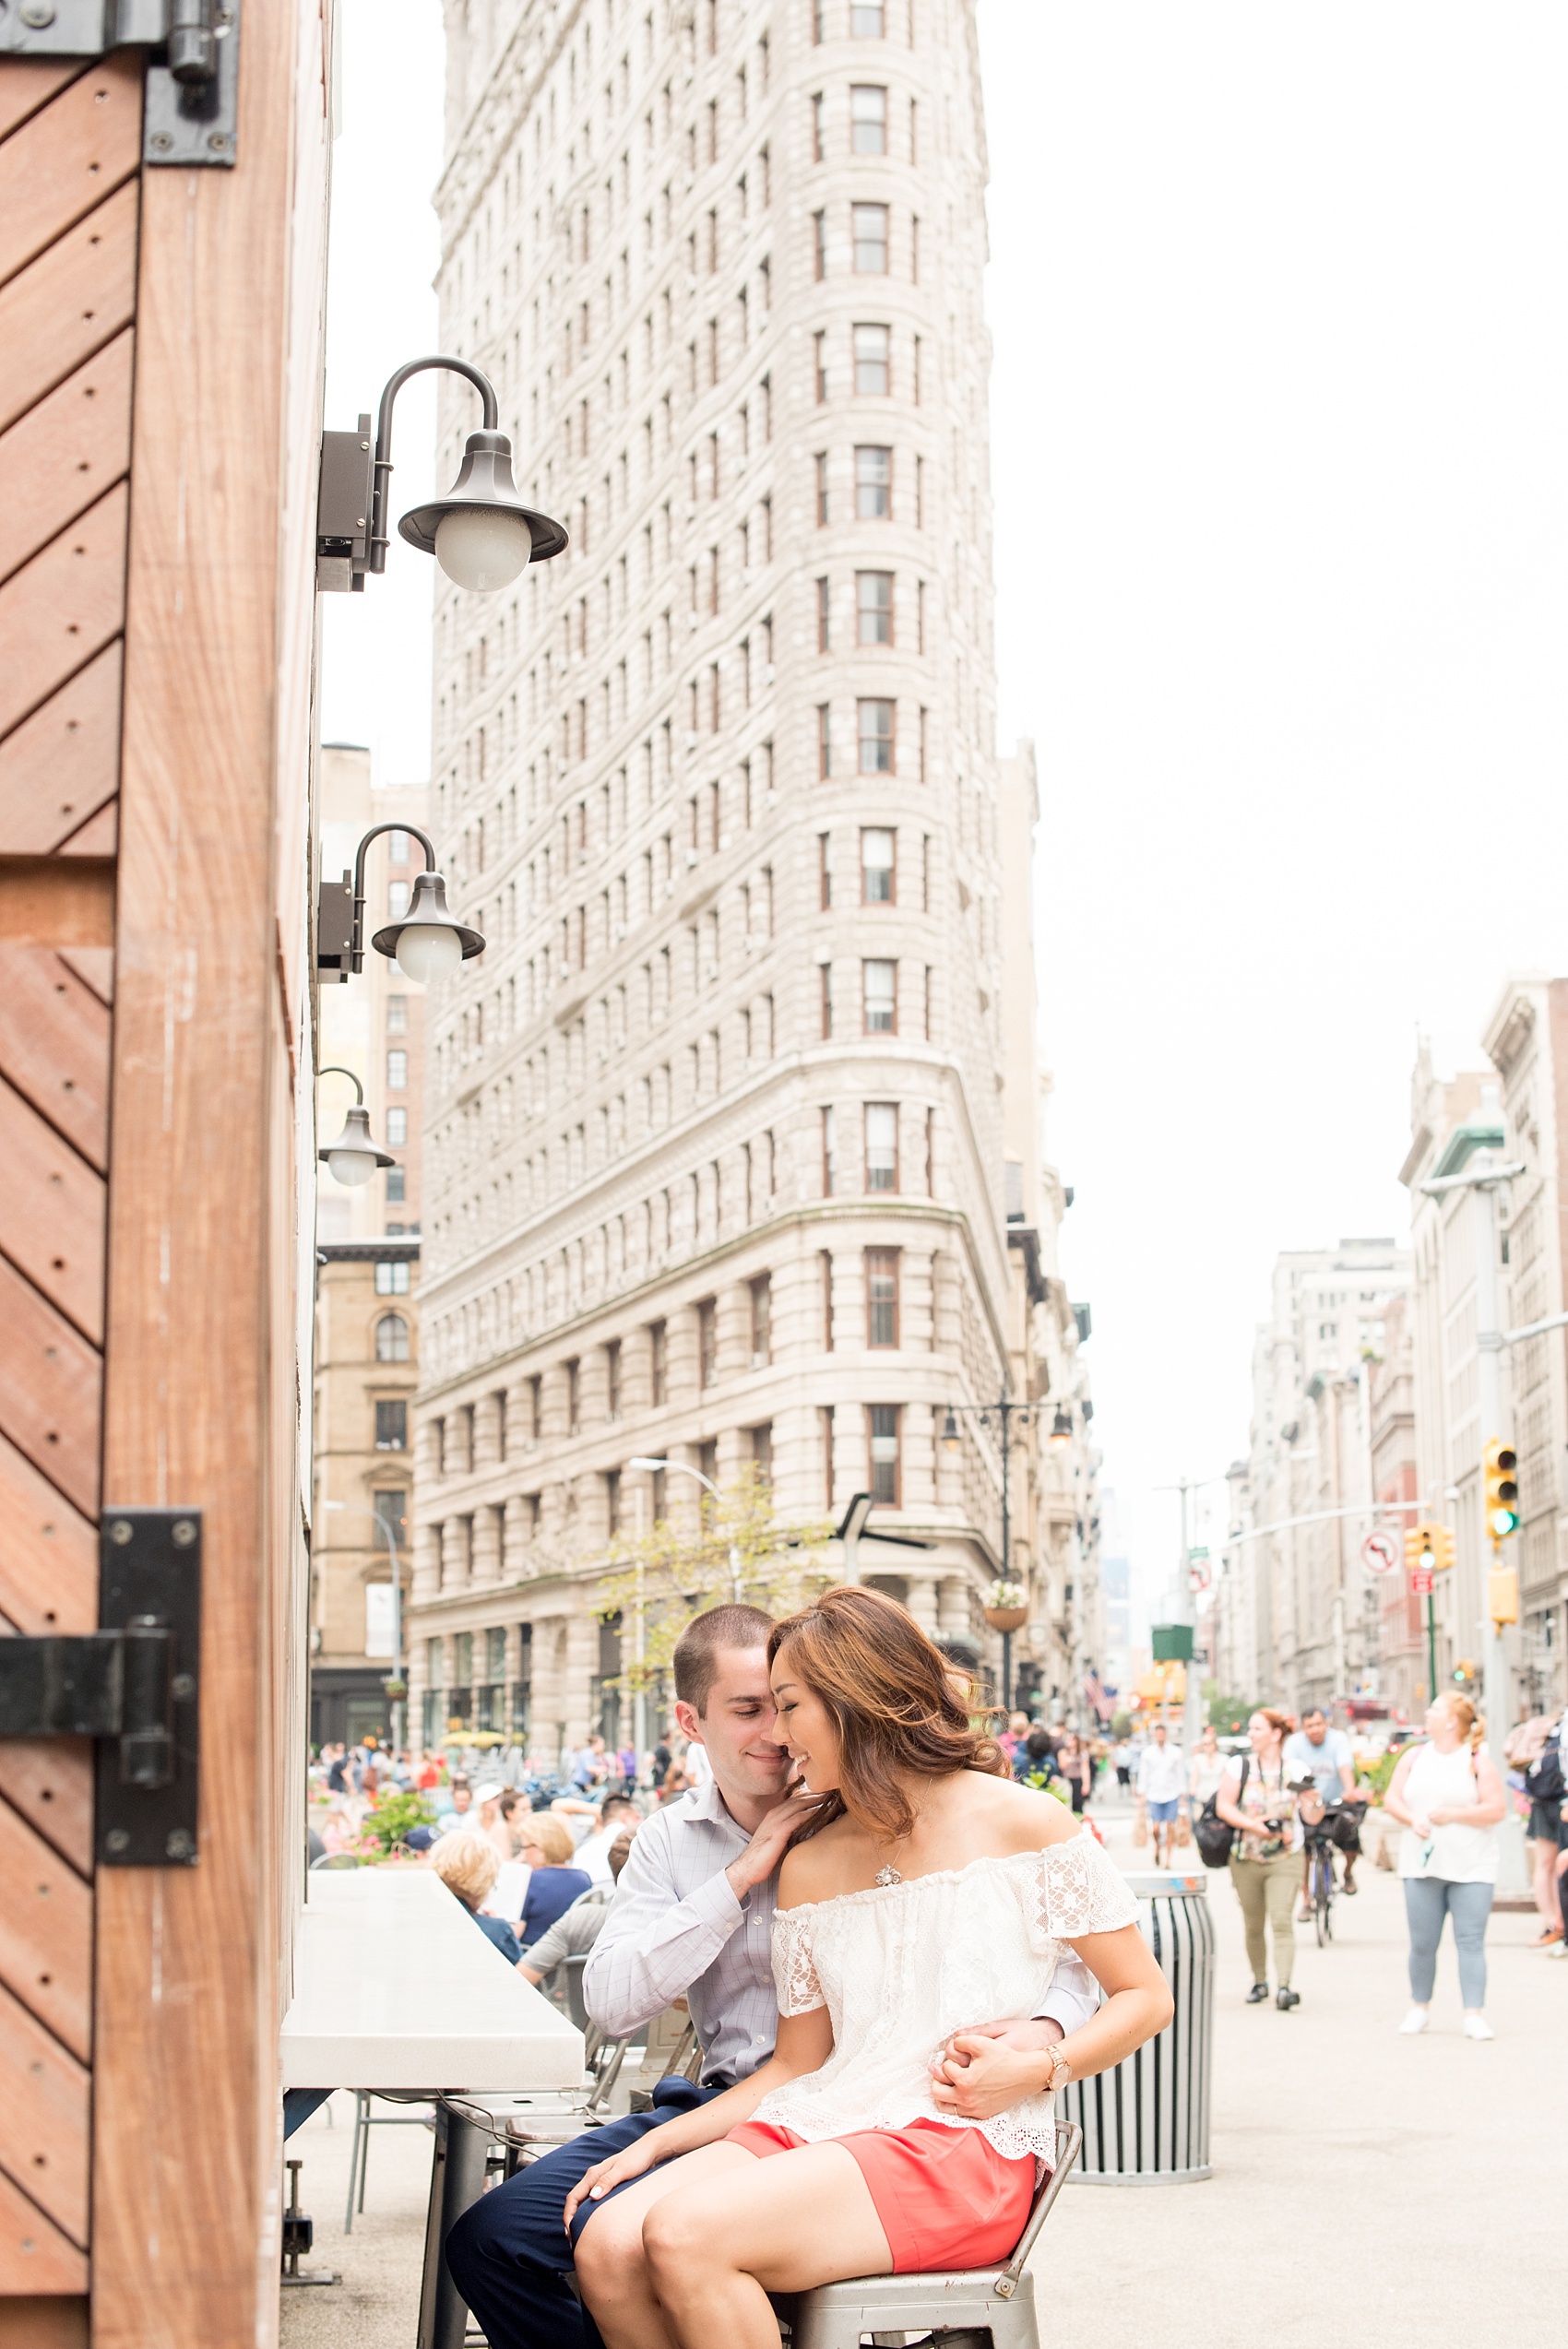 Mikkel Paige Photography photos of a Madison Square Park engagement session in NYC by the Flatiron building.